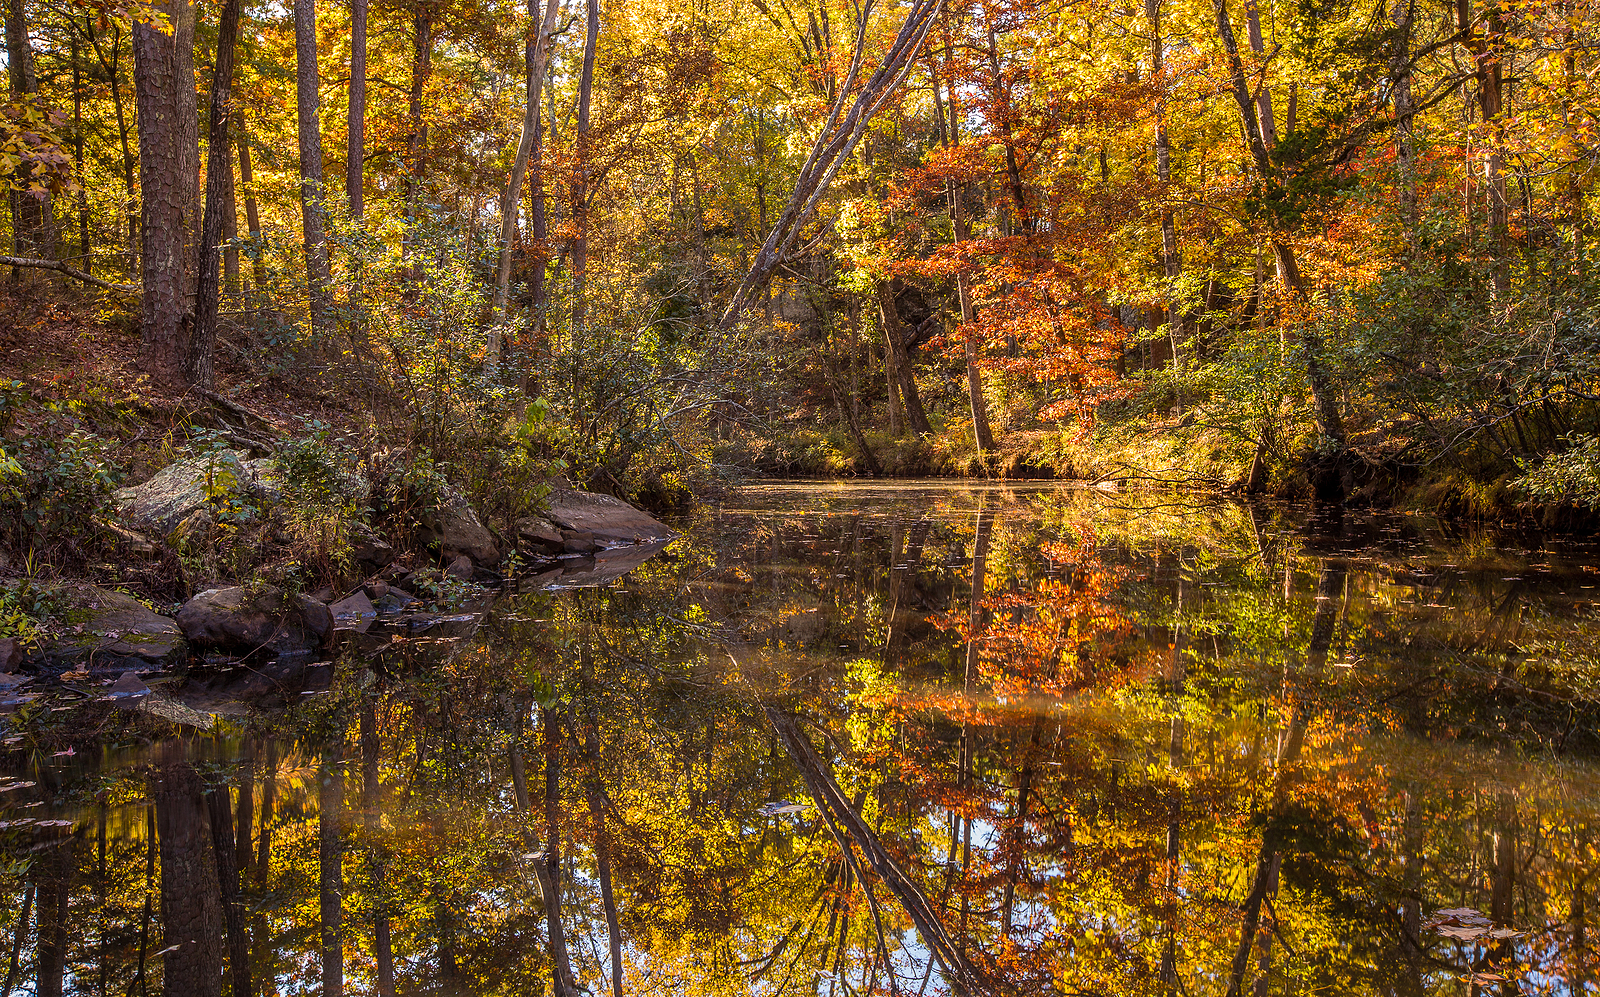 Arkansas fall landscape with trees in gold and yellow leaves and a brook running through the trees